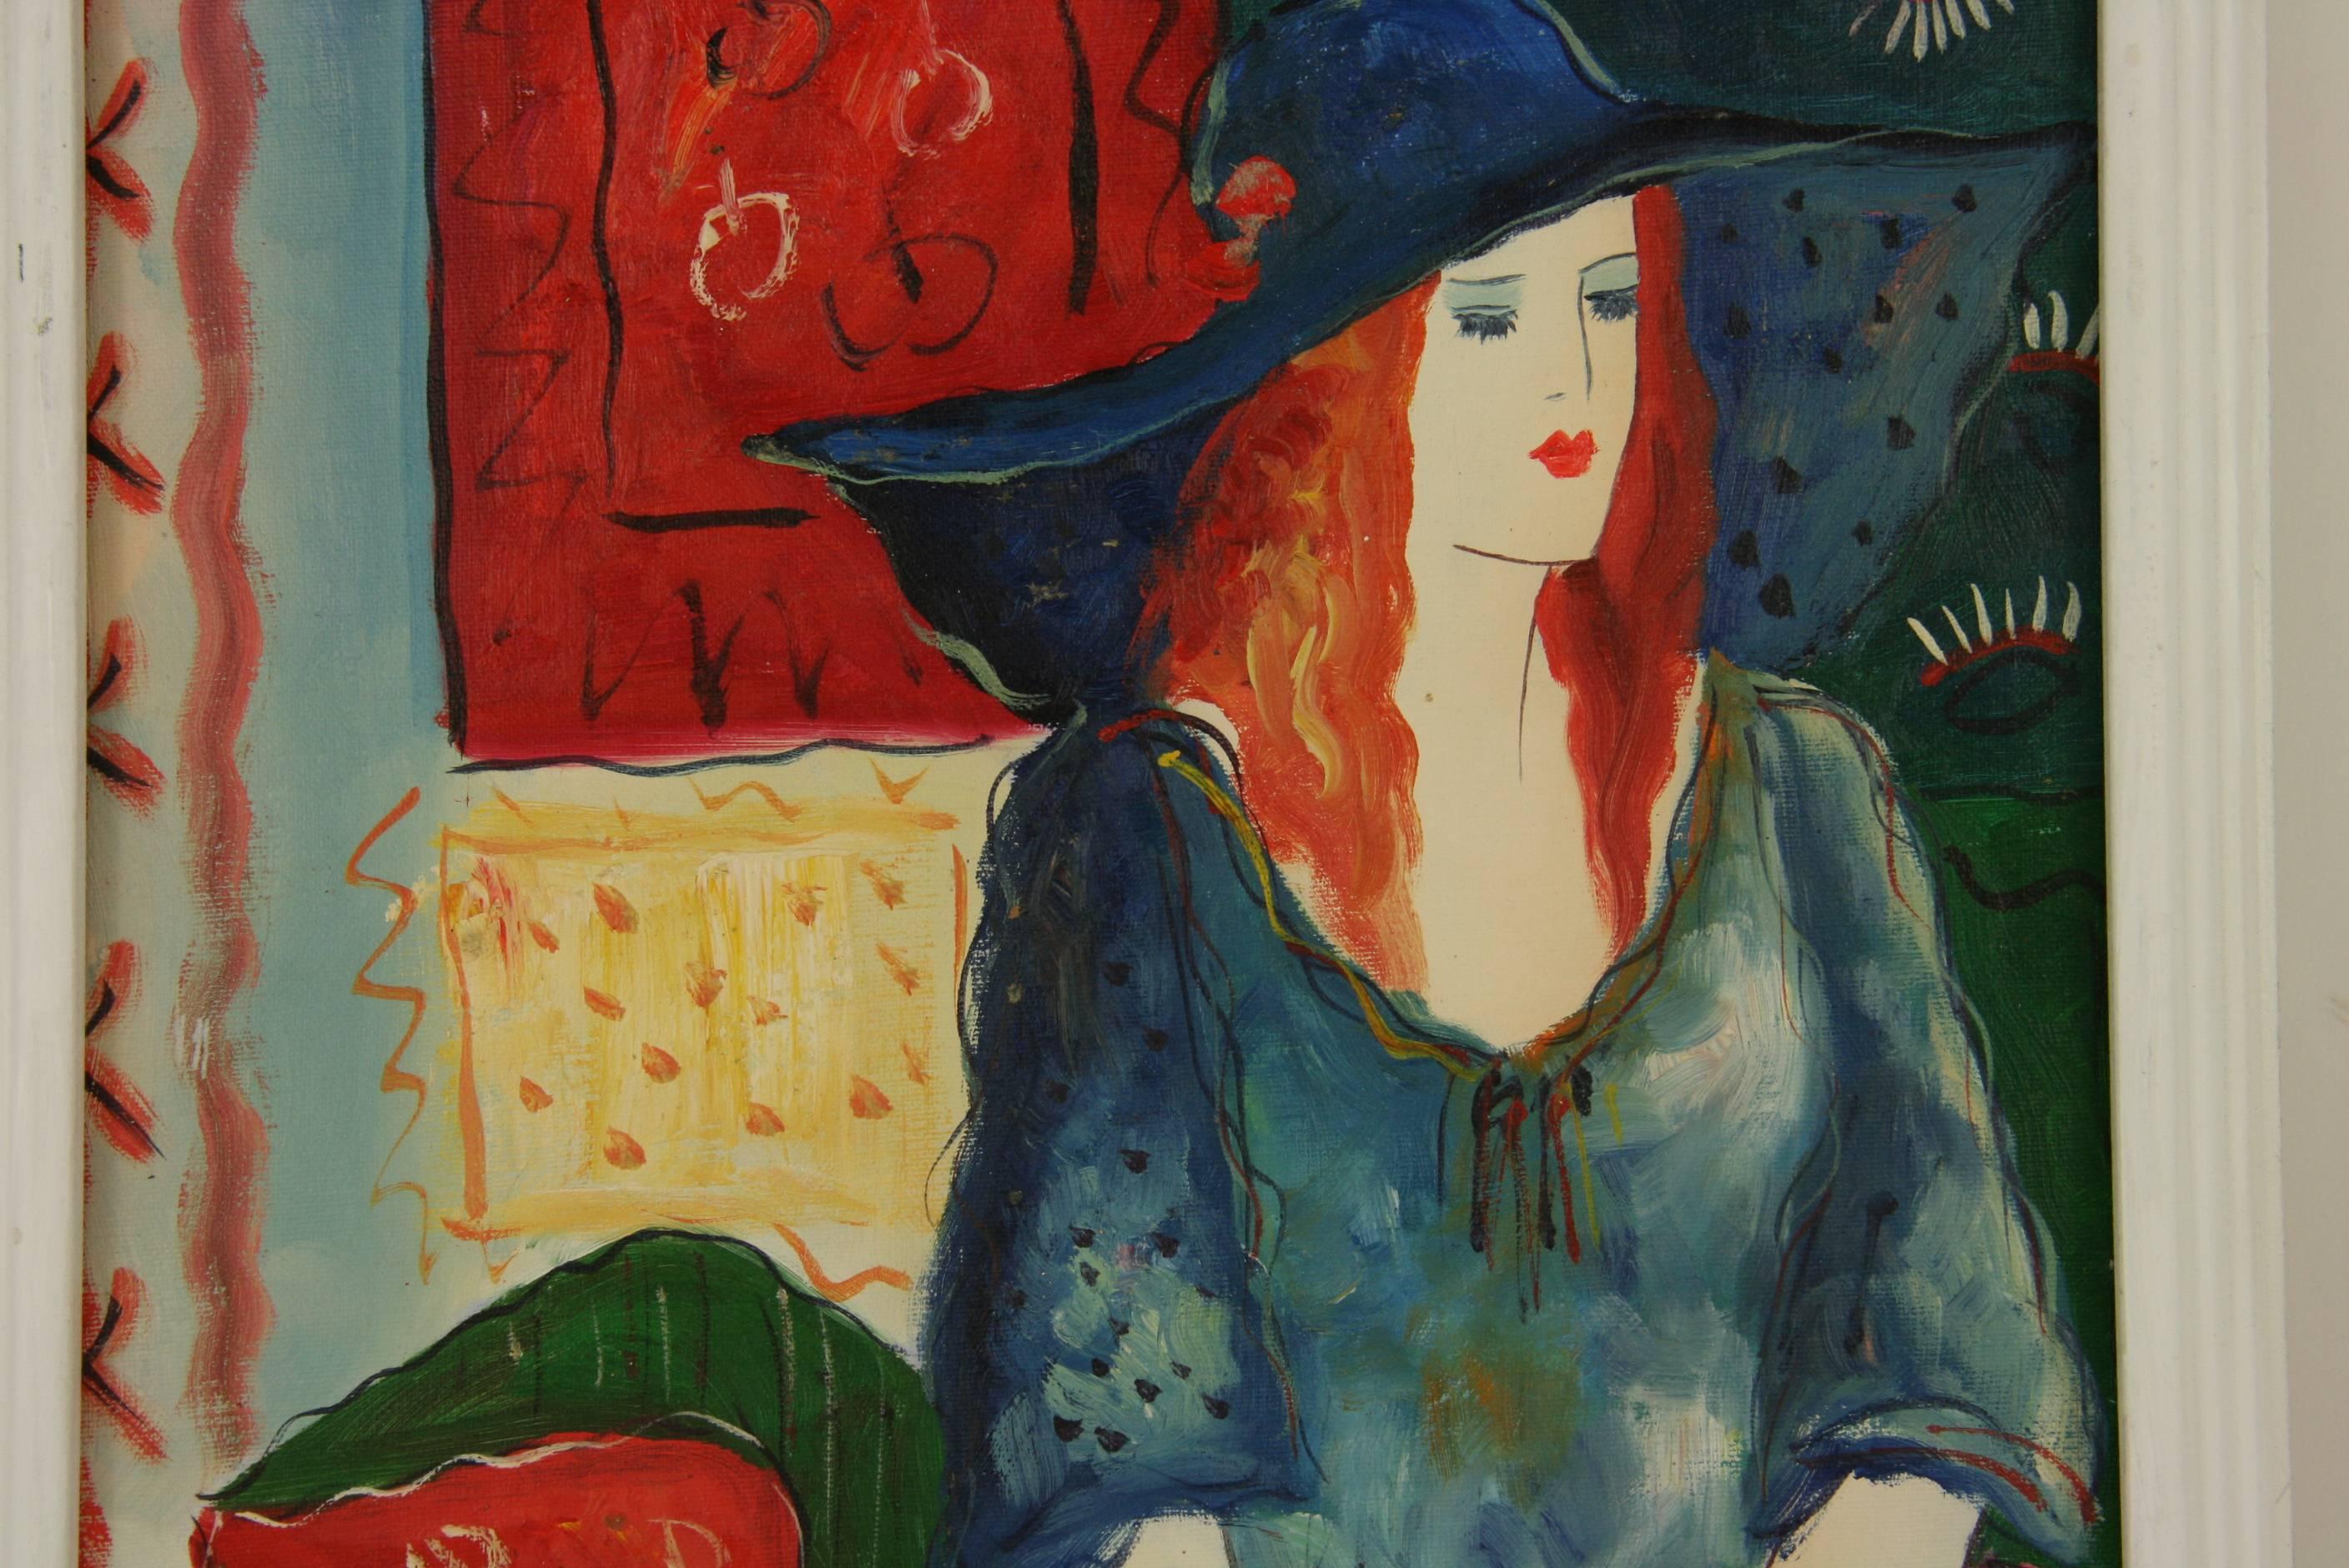  Girl With Blue Hat Figurative Painting By Moreti 2